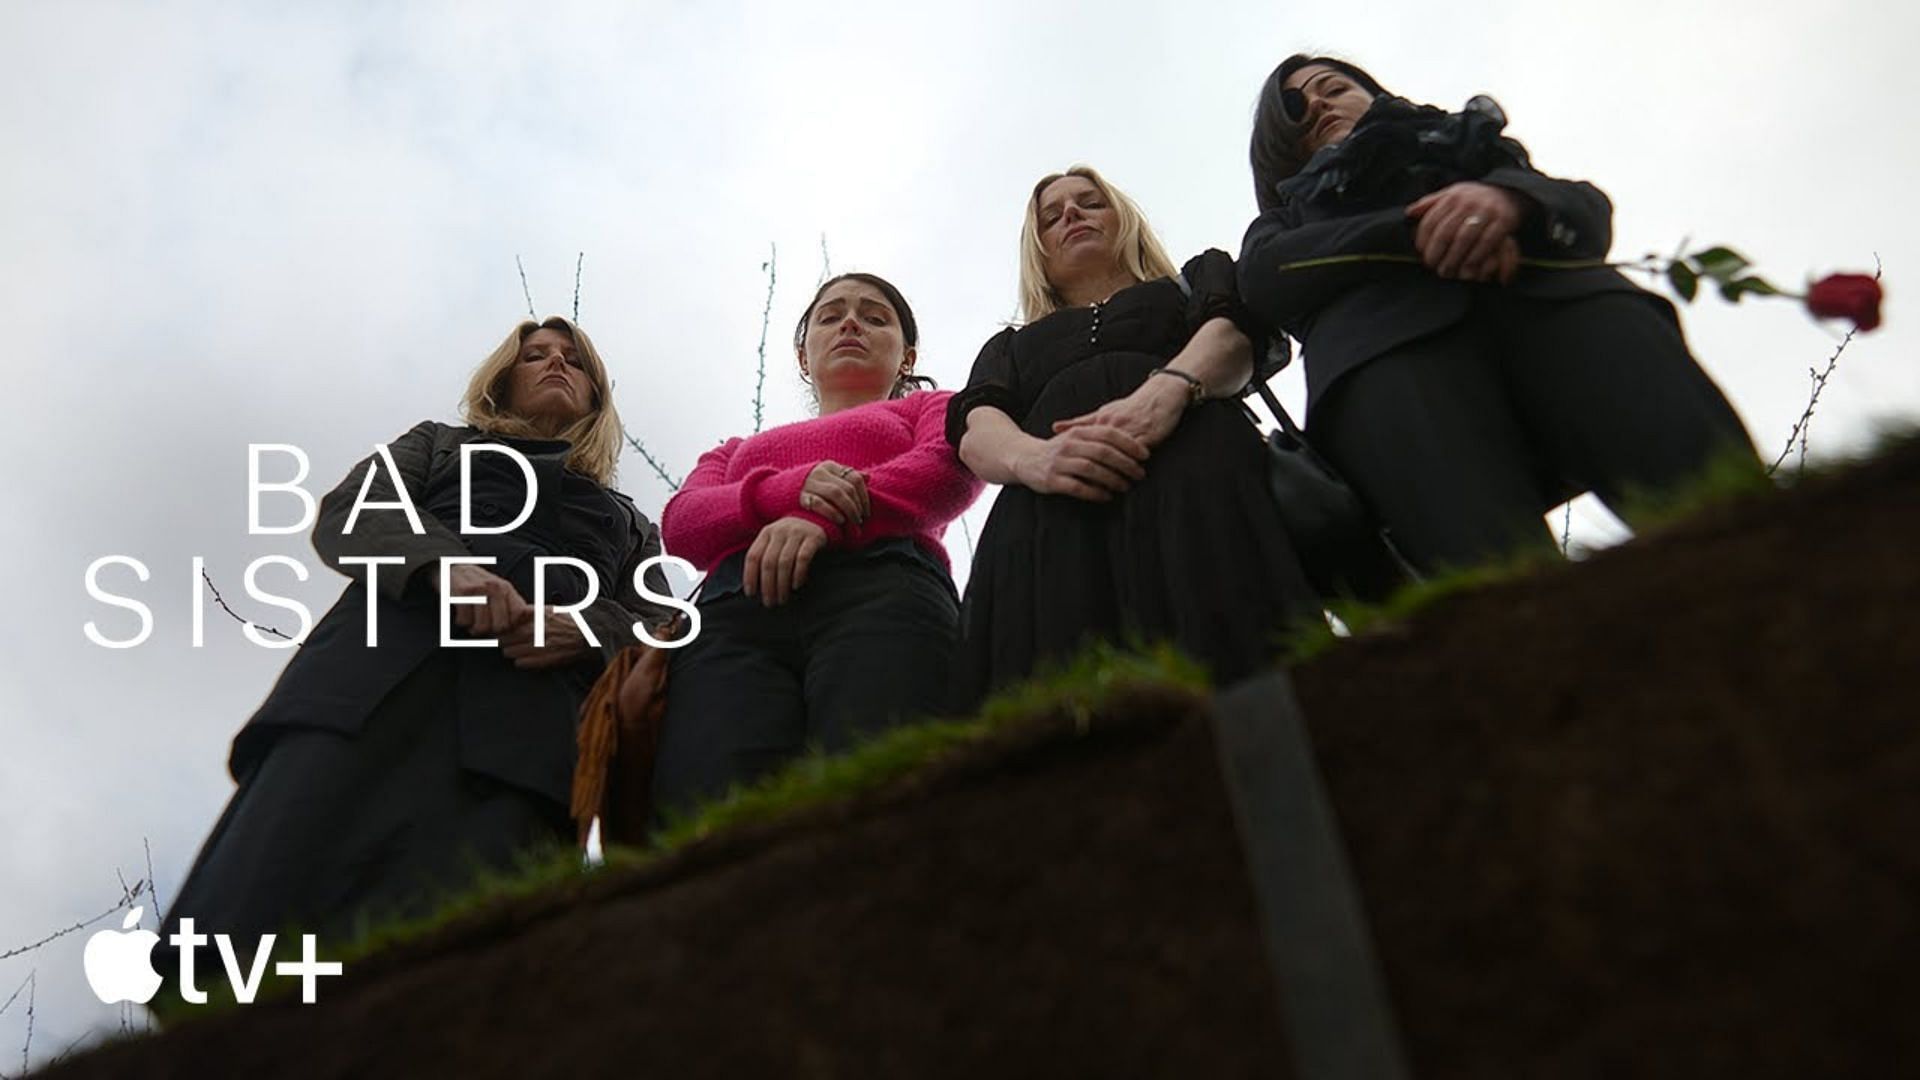 What Time Will Bad Sisters Season 1 Episode 1 And 2 Air On Apple Tv Details Explored